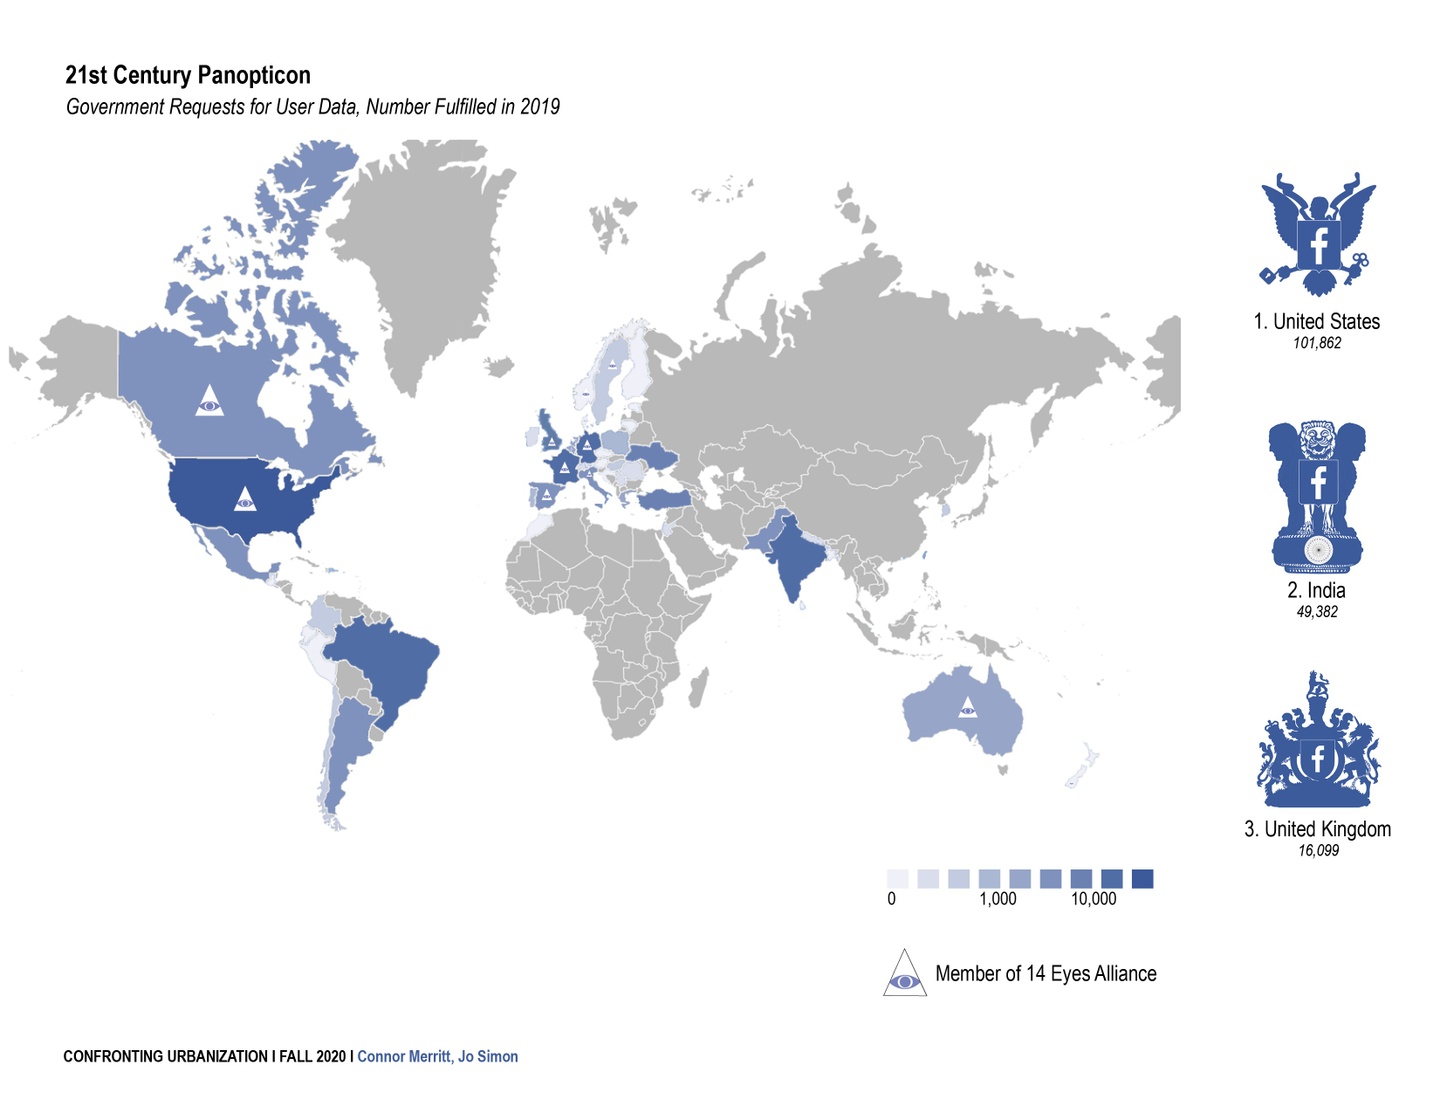 World map graphic rating different countries by number of government requests for user data fulfilled in 2019. The largest number is the US with 101,892 requests; second is India with 49,382 requests; third is the UK with 16,099 requests.